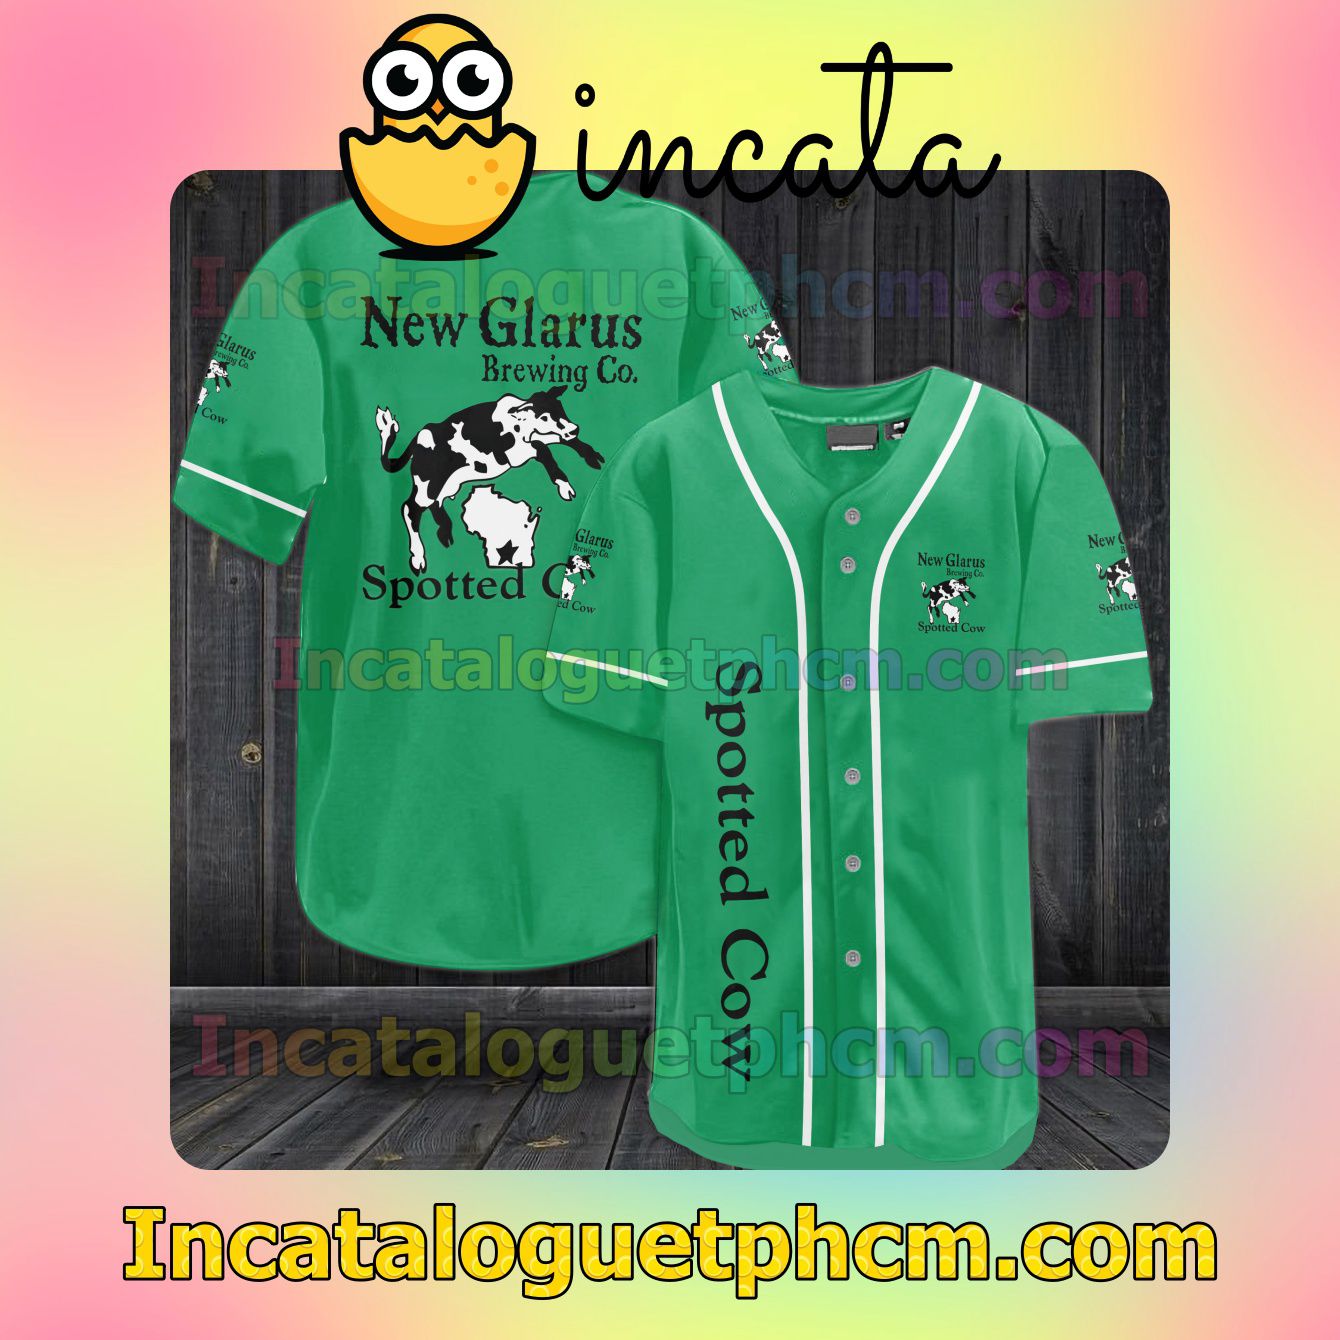 New Glarus Spotted Cow Beer Baseball Jersey Shirt